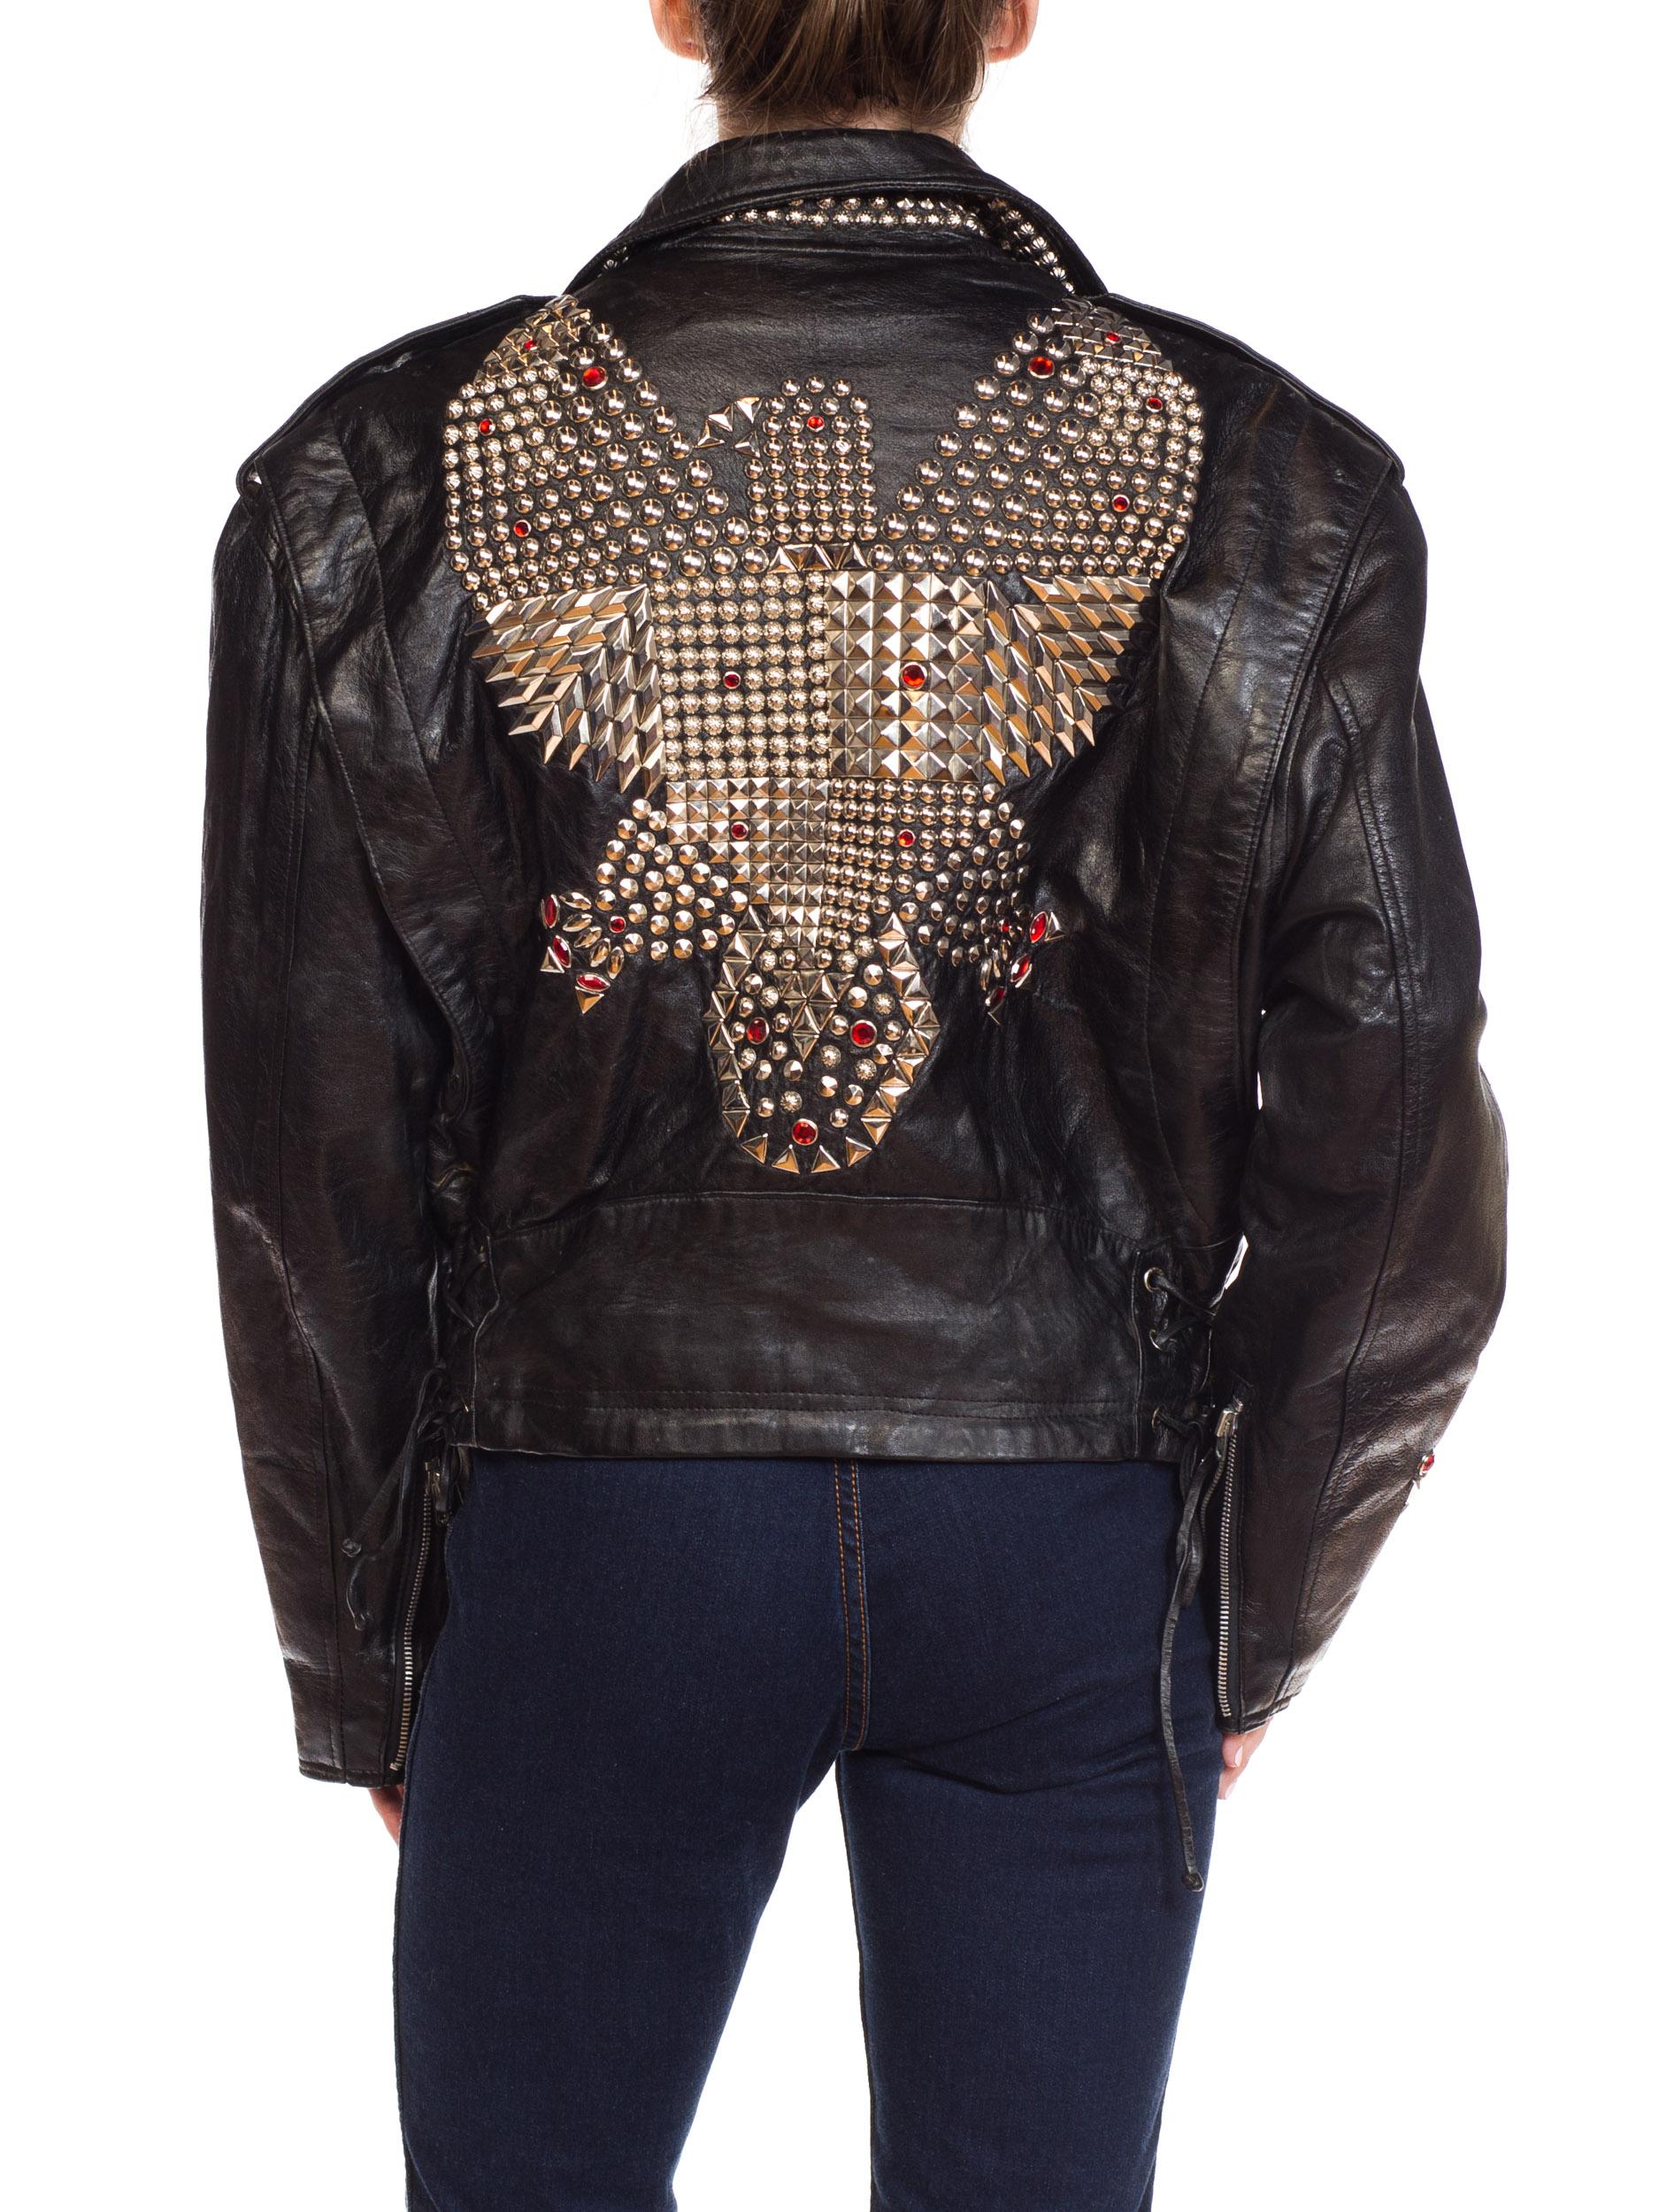 Leather Biker Jacket Covered in Studs & Crystals 4